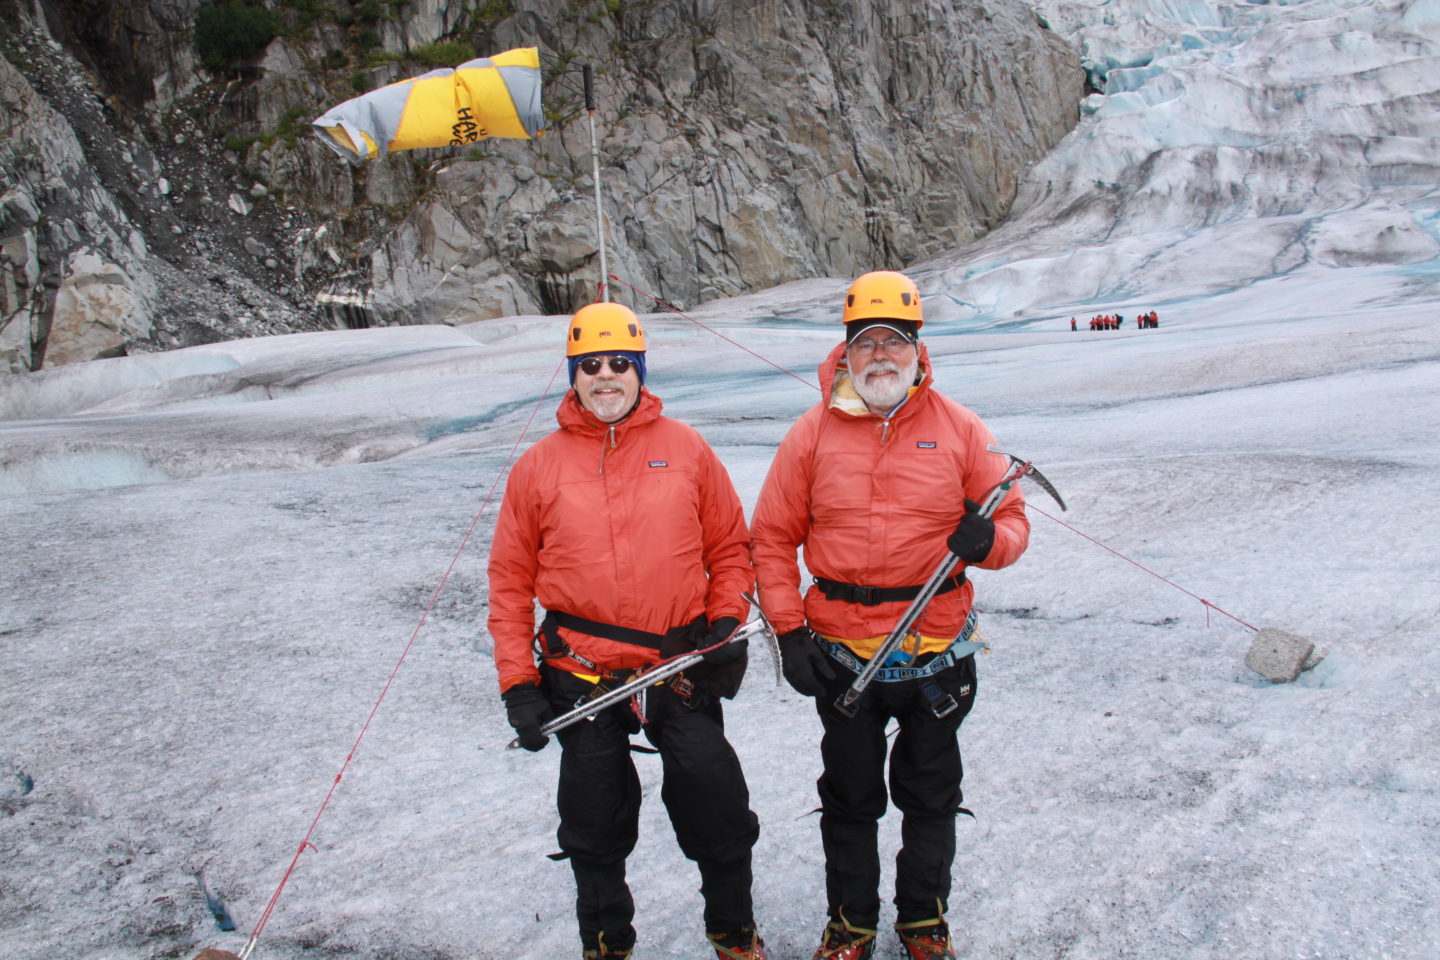 Glacier Trekking during our Alaska Cruise with Princess Cruises